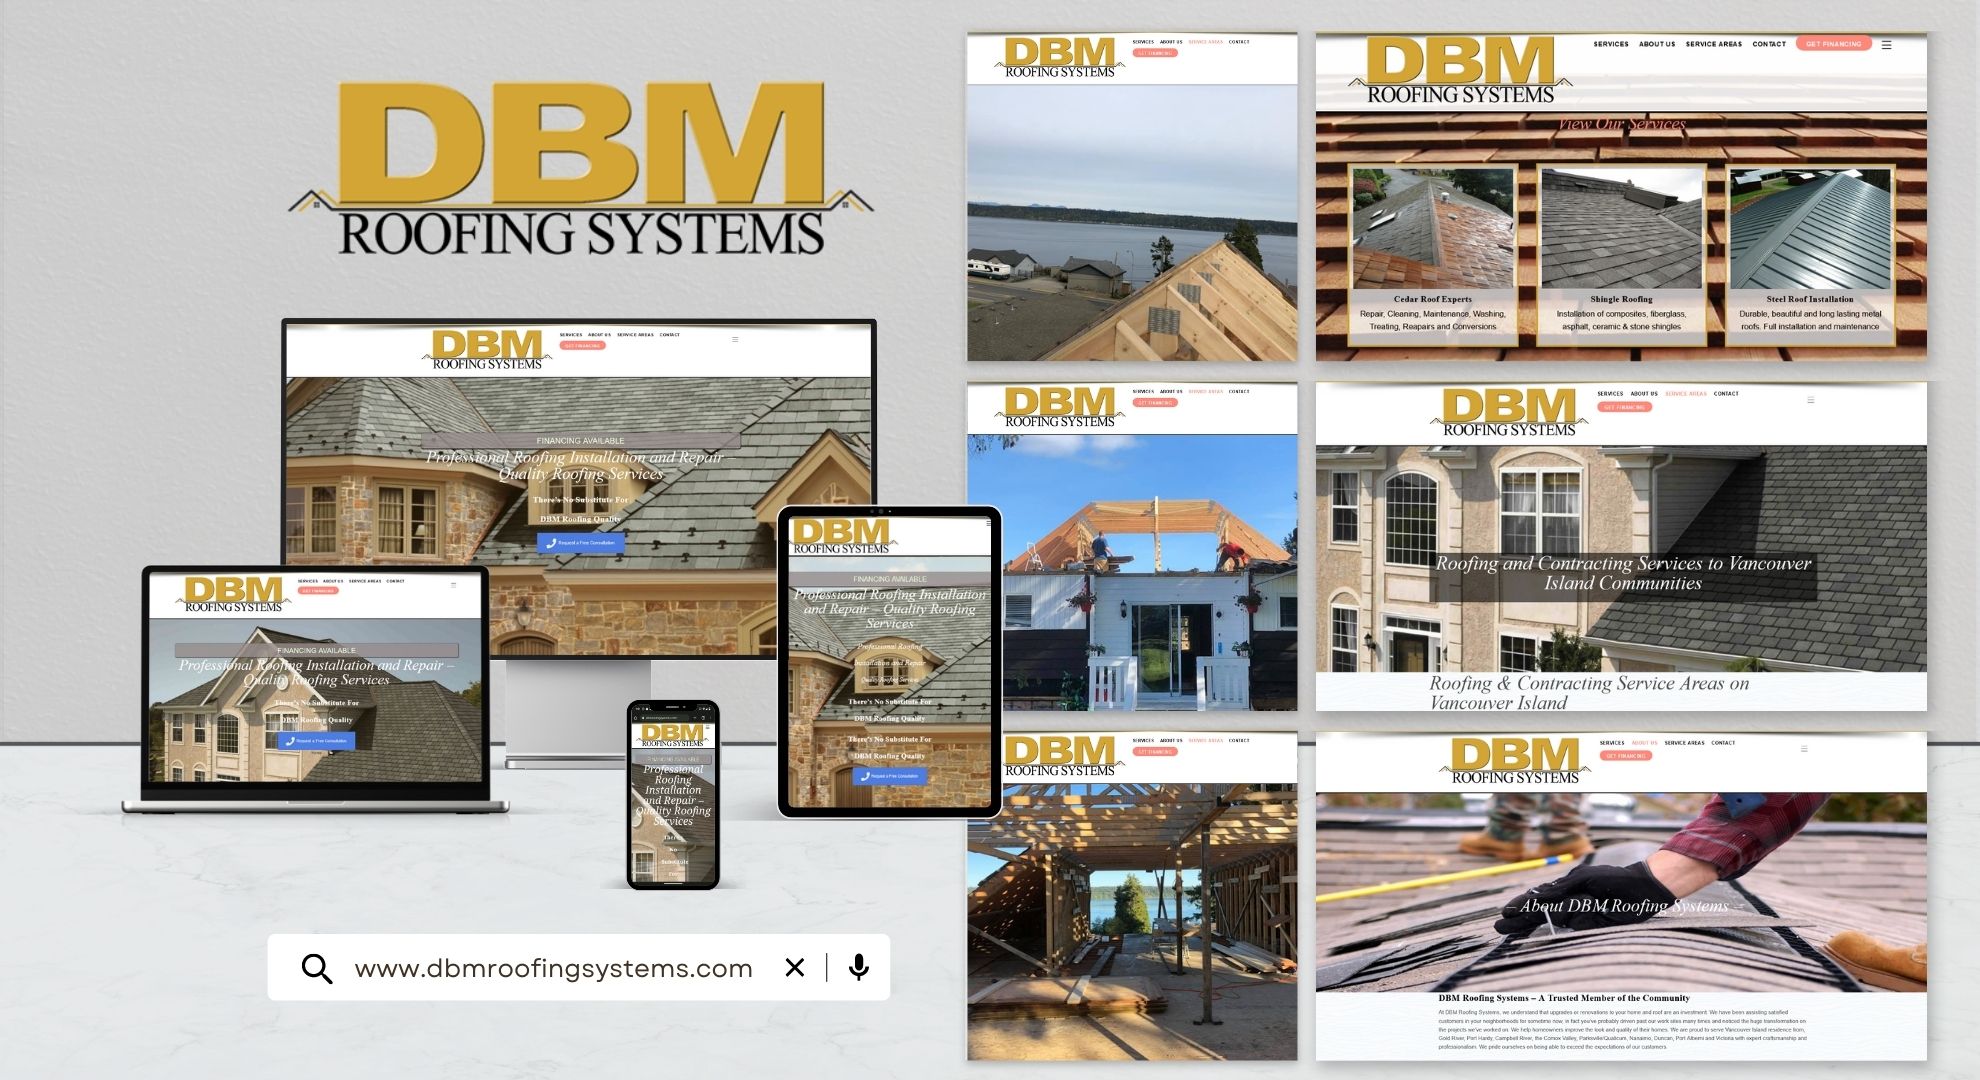 Case Study: <a href="https://dbmroofingsystems.com/" target="_blank">DBM Roofing Systems</a>